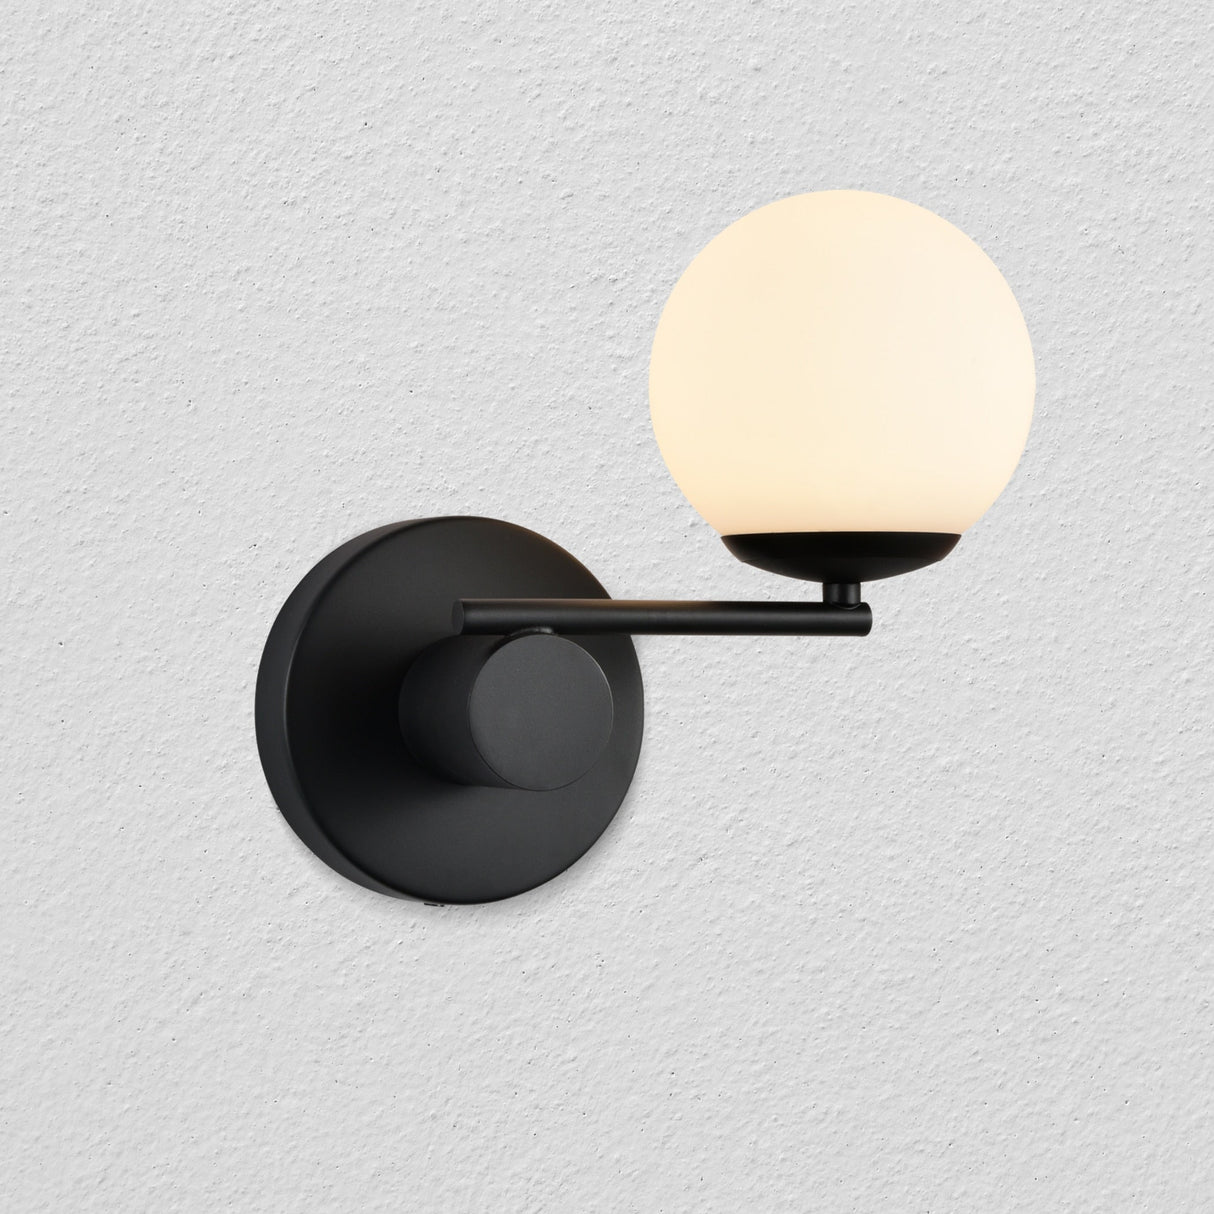 VONN Capri VCW1108BL 9" Integrated LED ETL Certified Wall Sconce Light in Black with 1 Glass Shade